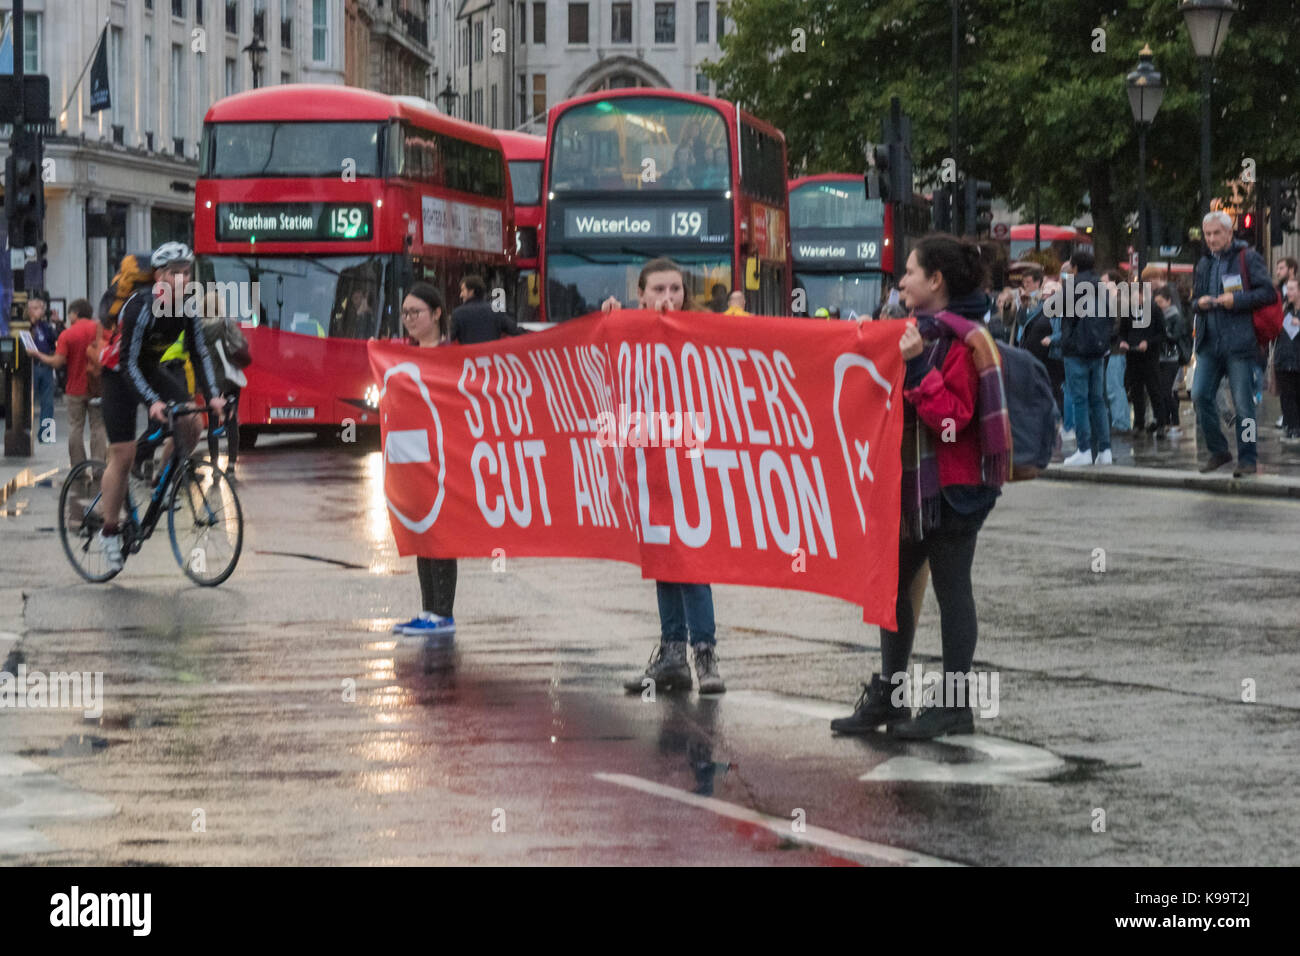 September 21, 2017 - London, UK - London, UK. 21st September 2017. Campaigners for 'Stop Killing Londoners' hold a banner in Trafalgar Square cleared of traffic - except for cyclists -  in a short protest against the illegal levels of air pollution in the capital which result in 9,500 premature deaths and much suffering from respiratory disease. In a carefully planned protest they blocked all five entrances to the roundabout at the square, emptying it of traffic while they spoke about the problem and handed out leaflets. This was the 5th protest by campaigners from Rising Up aimed at mobilisin Stock Photo